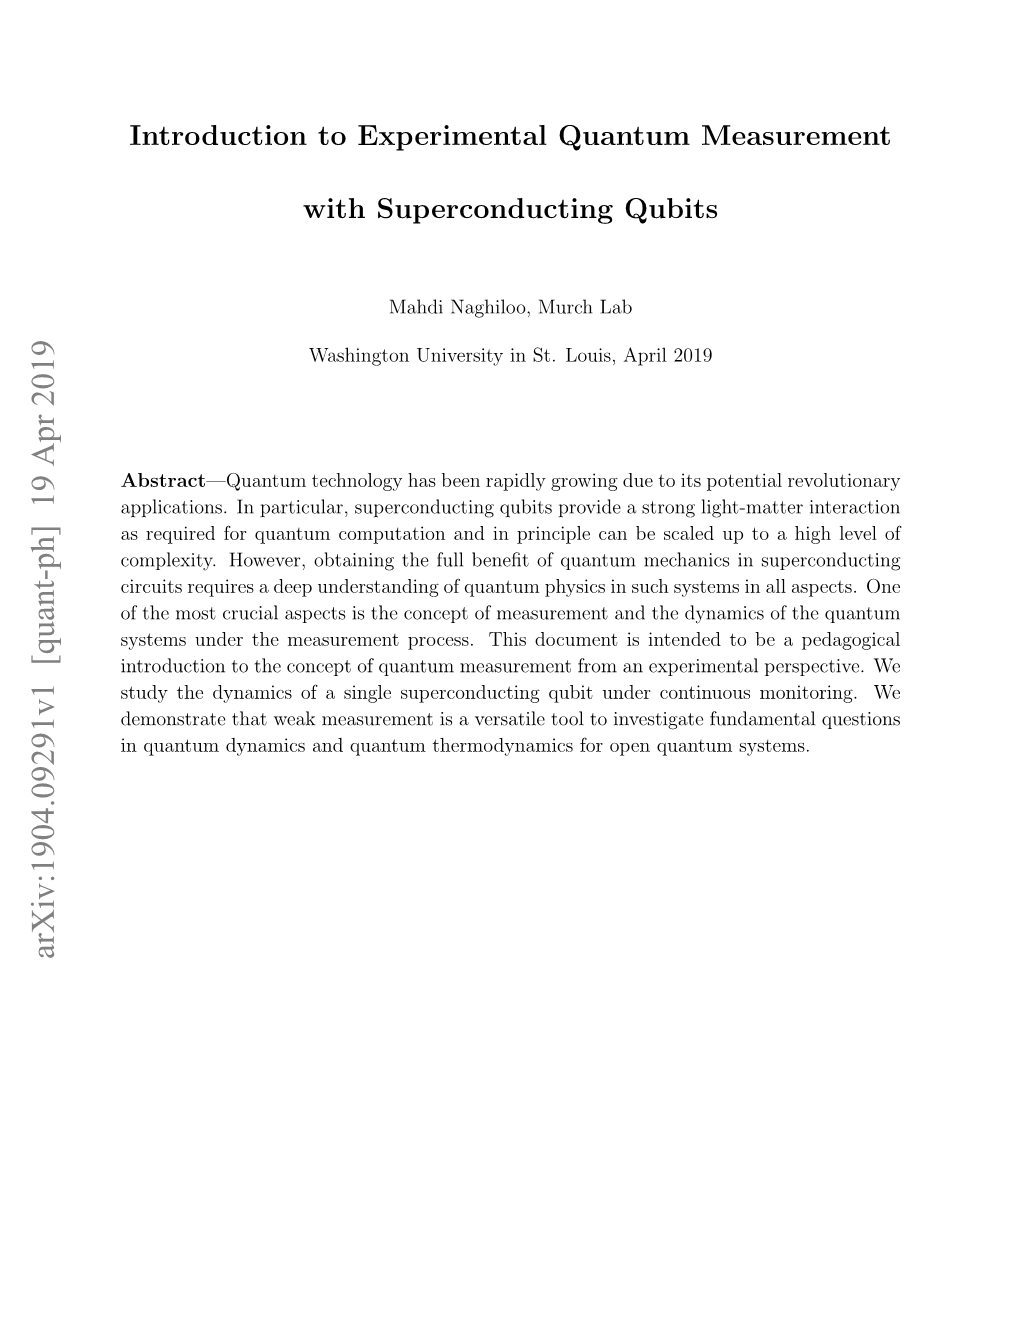 Introduction to Experimental Quantum Measurement With